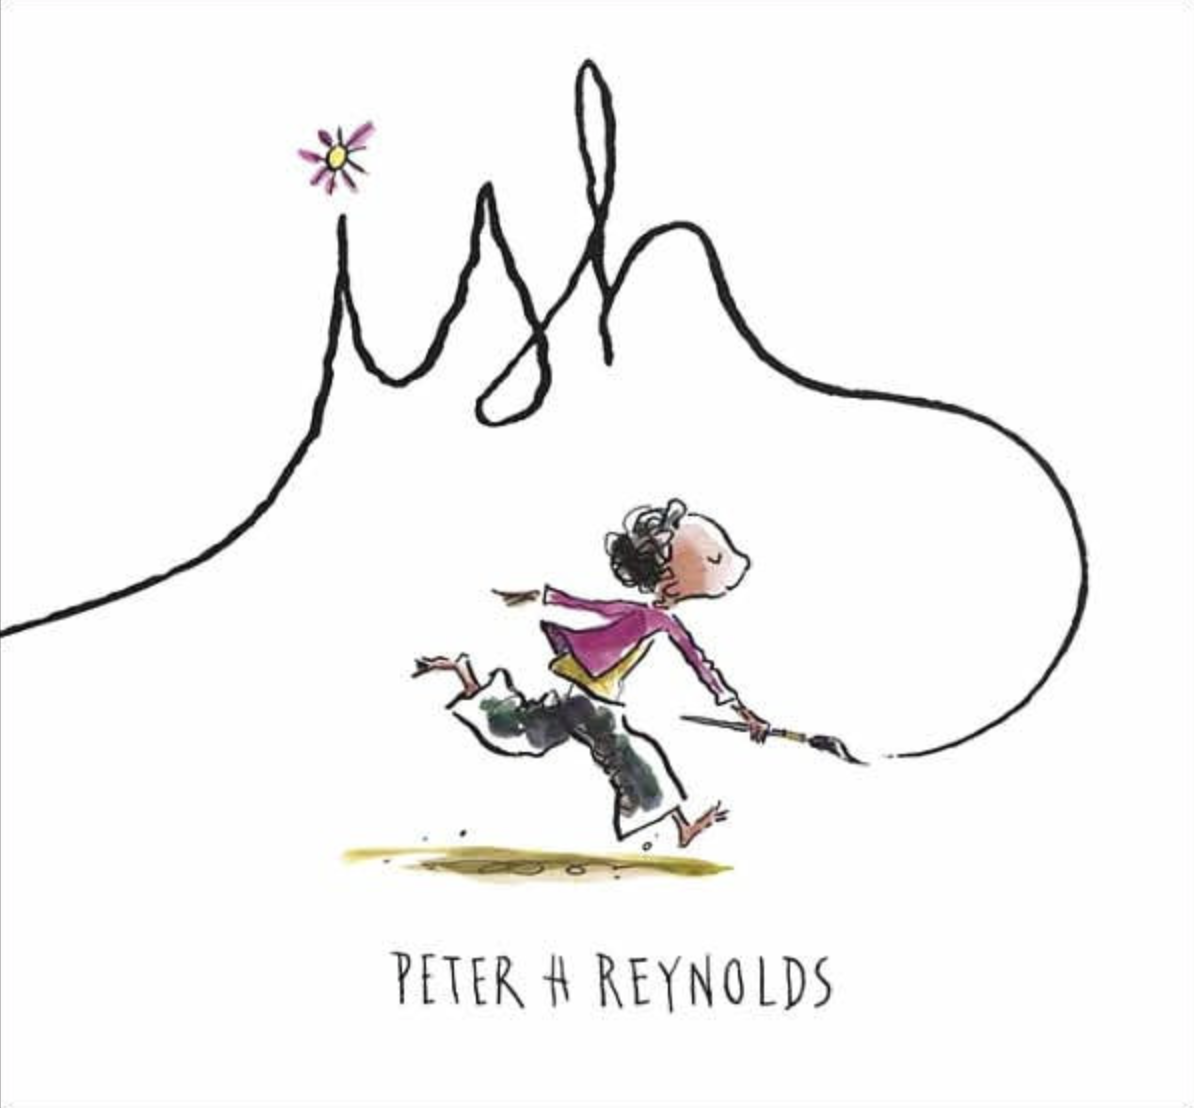 Illustrated book cover for the book Ish featuring a boy joyfully running with a paintbrush. The book's title, "ish," is painted in cursive by the boy. The "i" in "ish" is dotted with a flower.